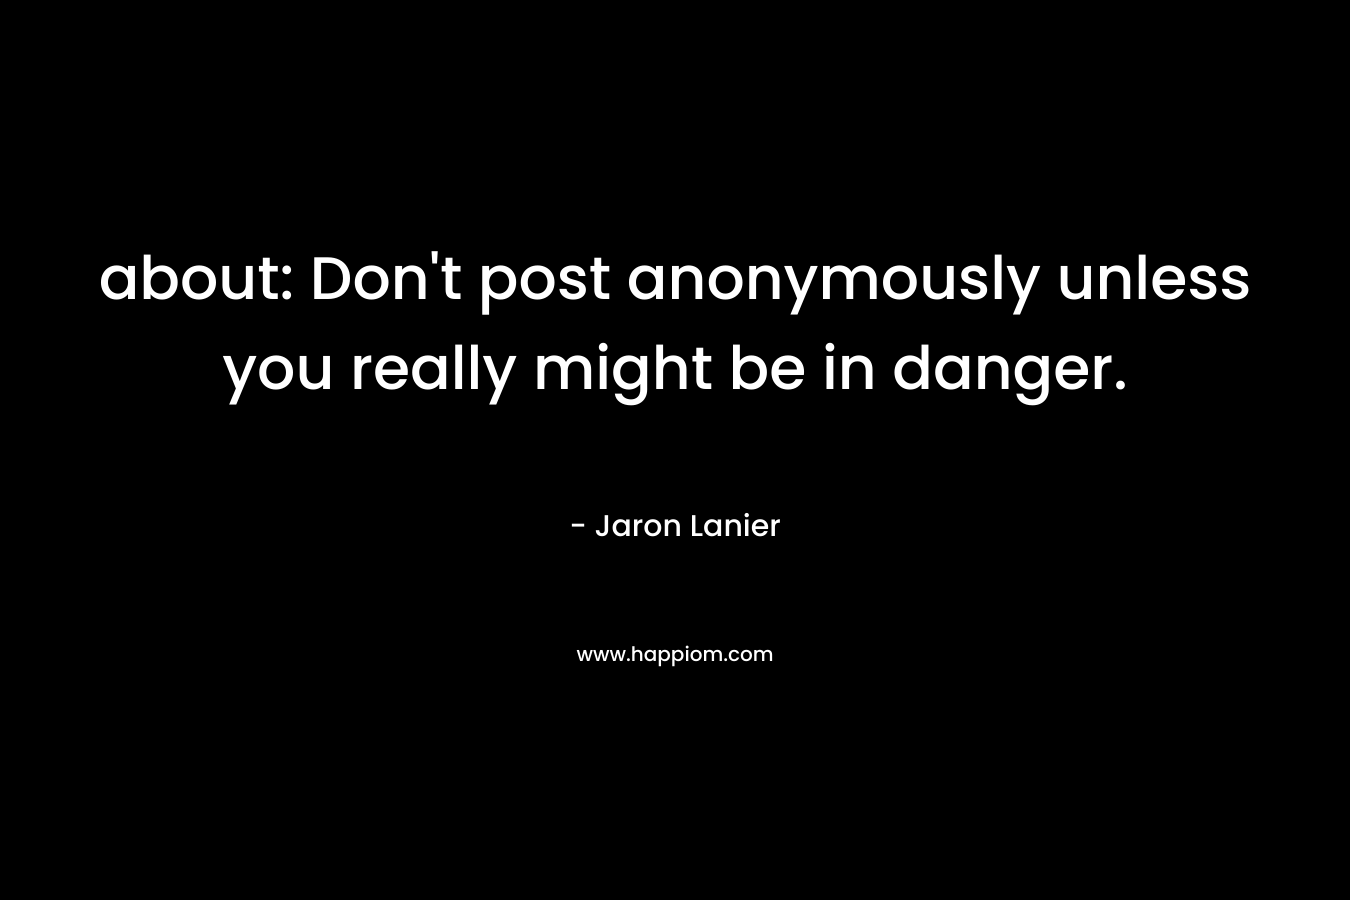 about: Don’t post anonymously unless you really might be in danger. – Jaron Lanier